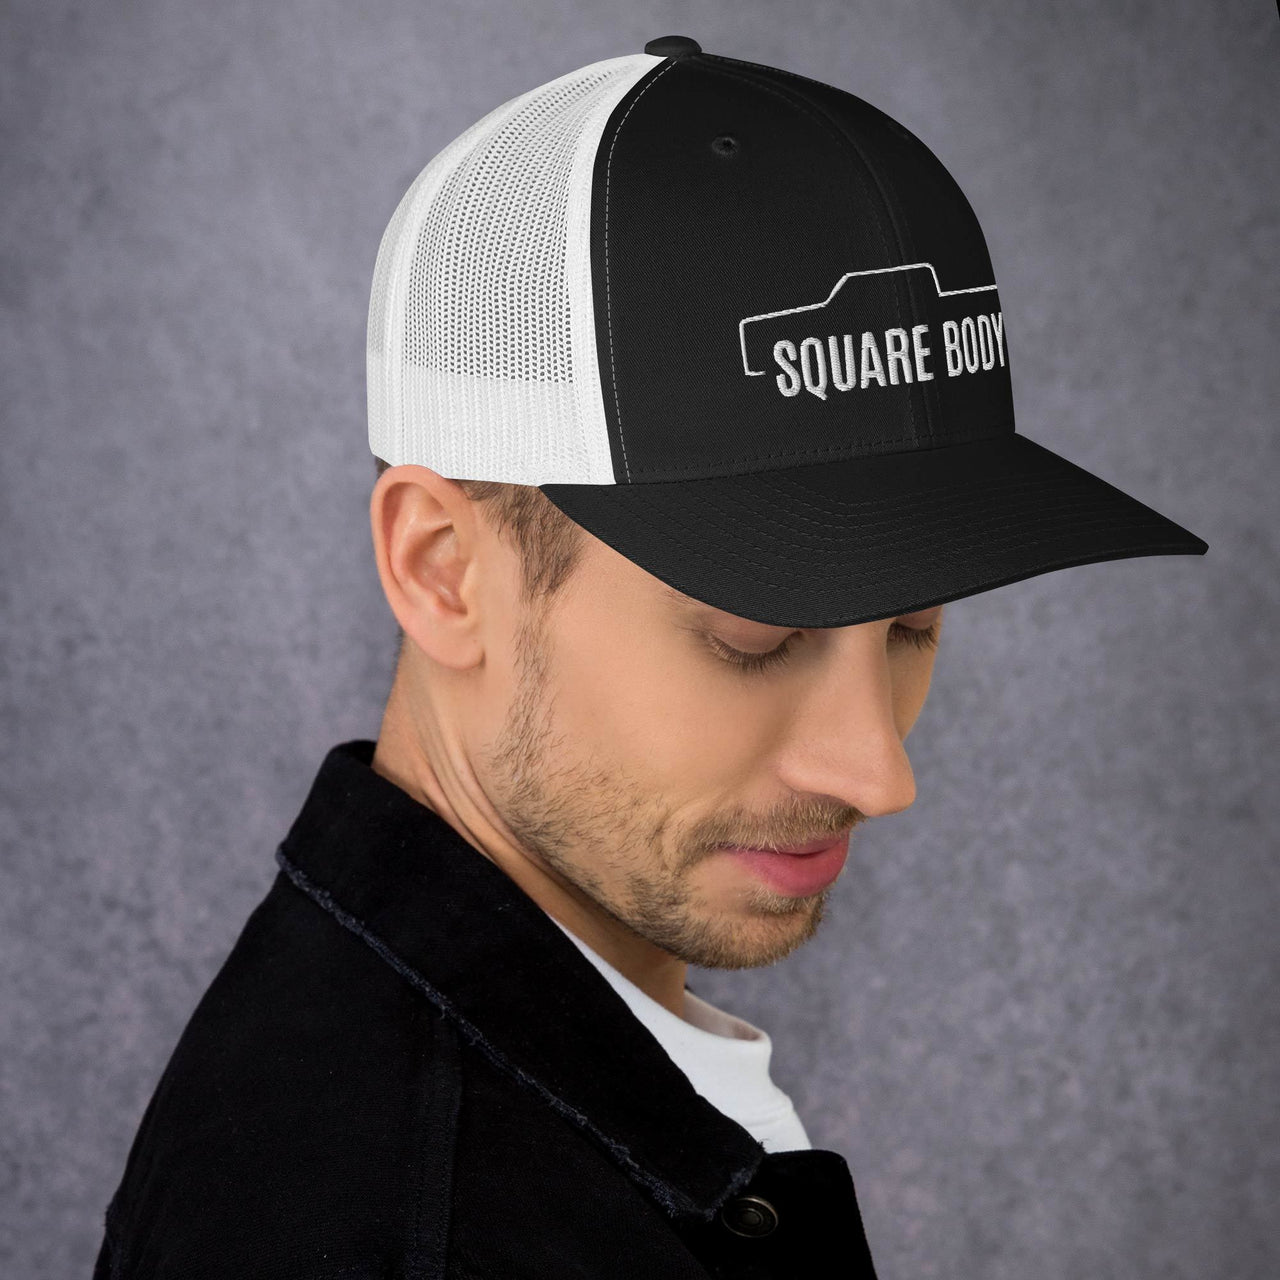 Man wearing a Crew Cab Square Body Trucker Hat From Aggressive Thread in black and white